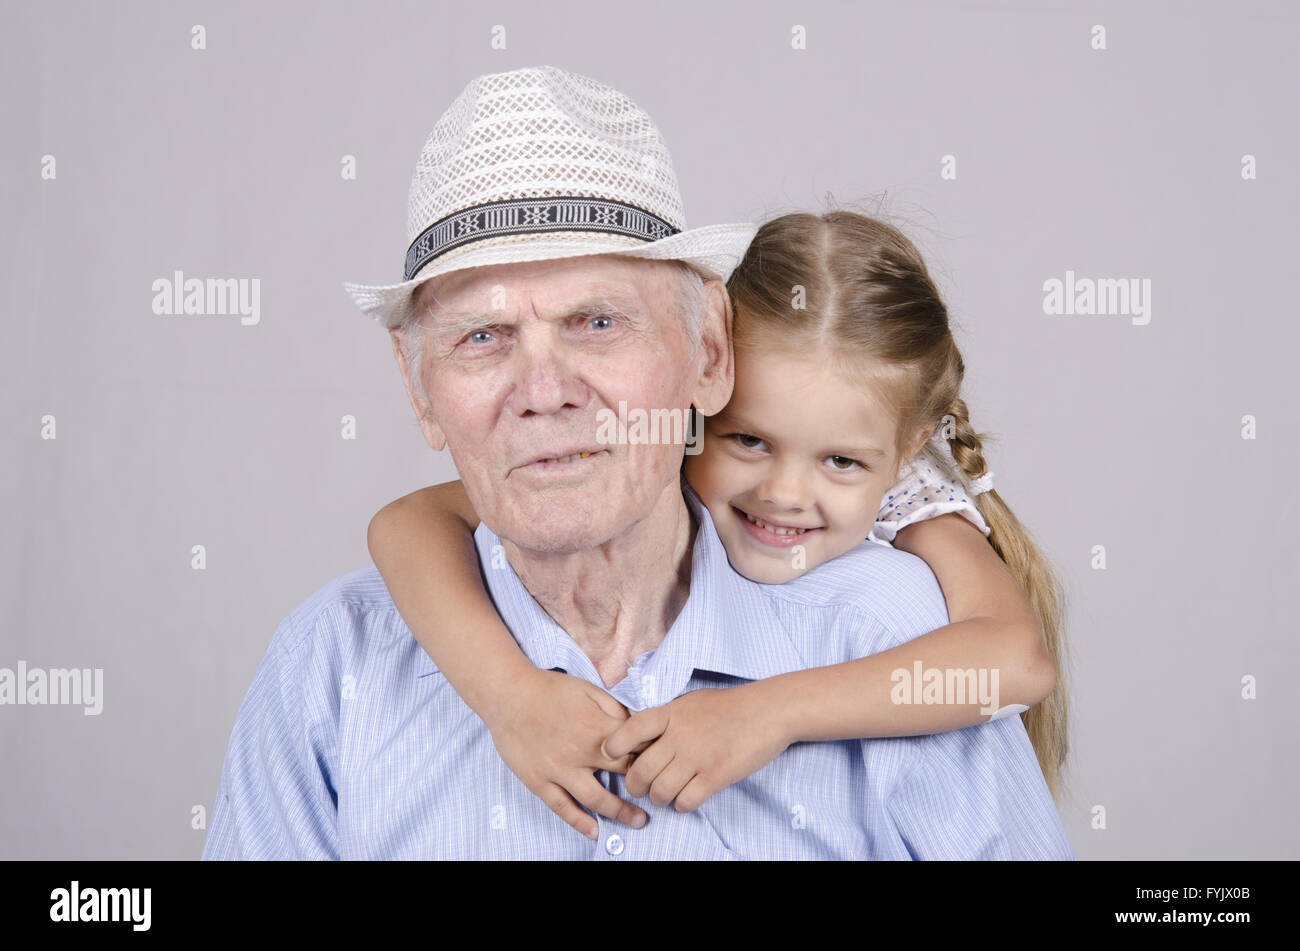 Portrait of an old man eighty years with granddaughter Stock Photo